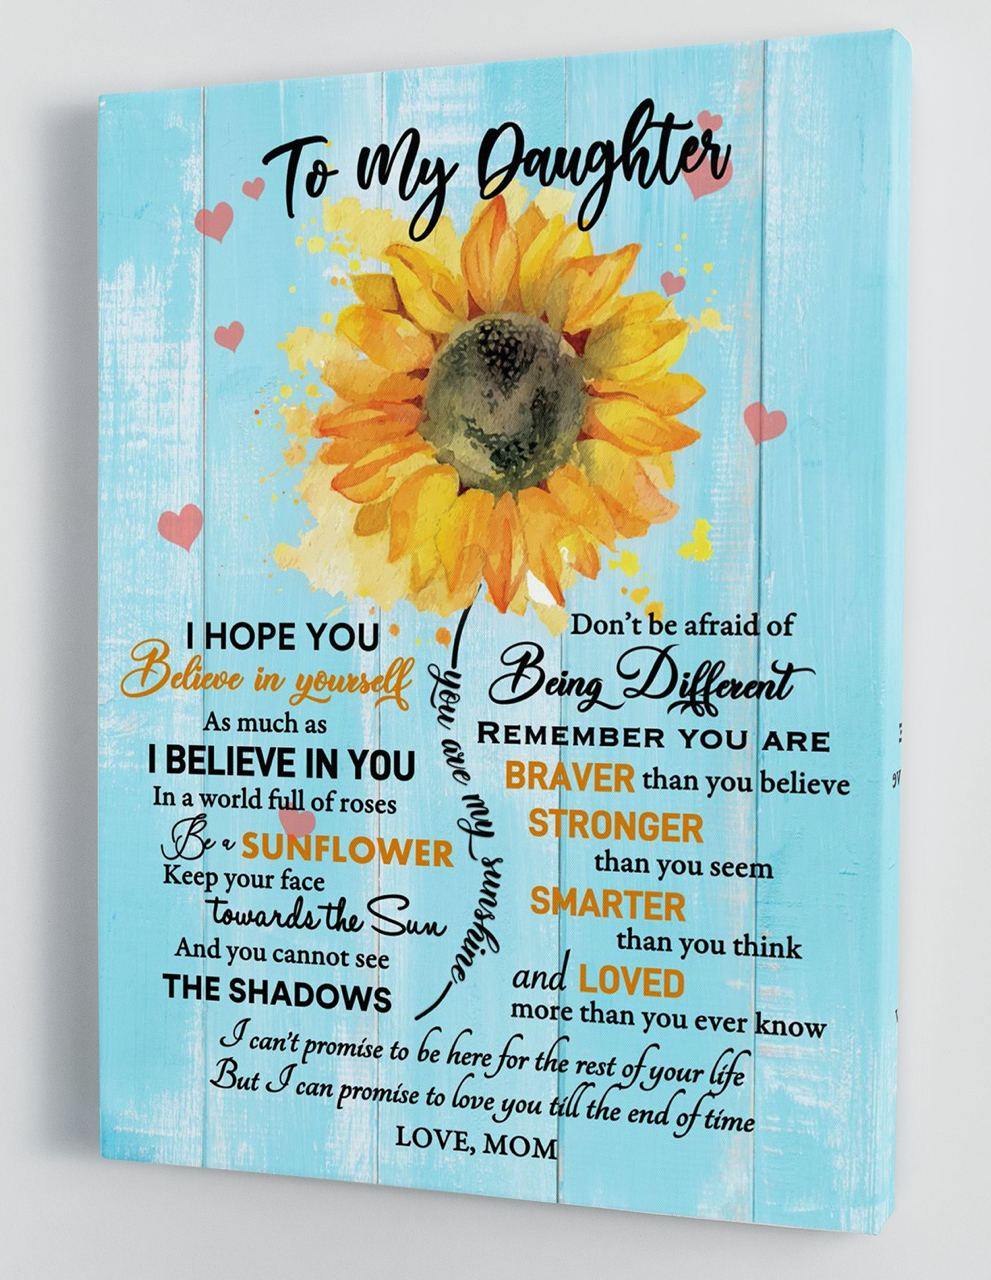 To My Daughter - From Mom - Hard Time Framed Canvas Gift MD059 - DivesArt LLC